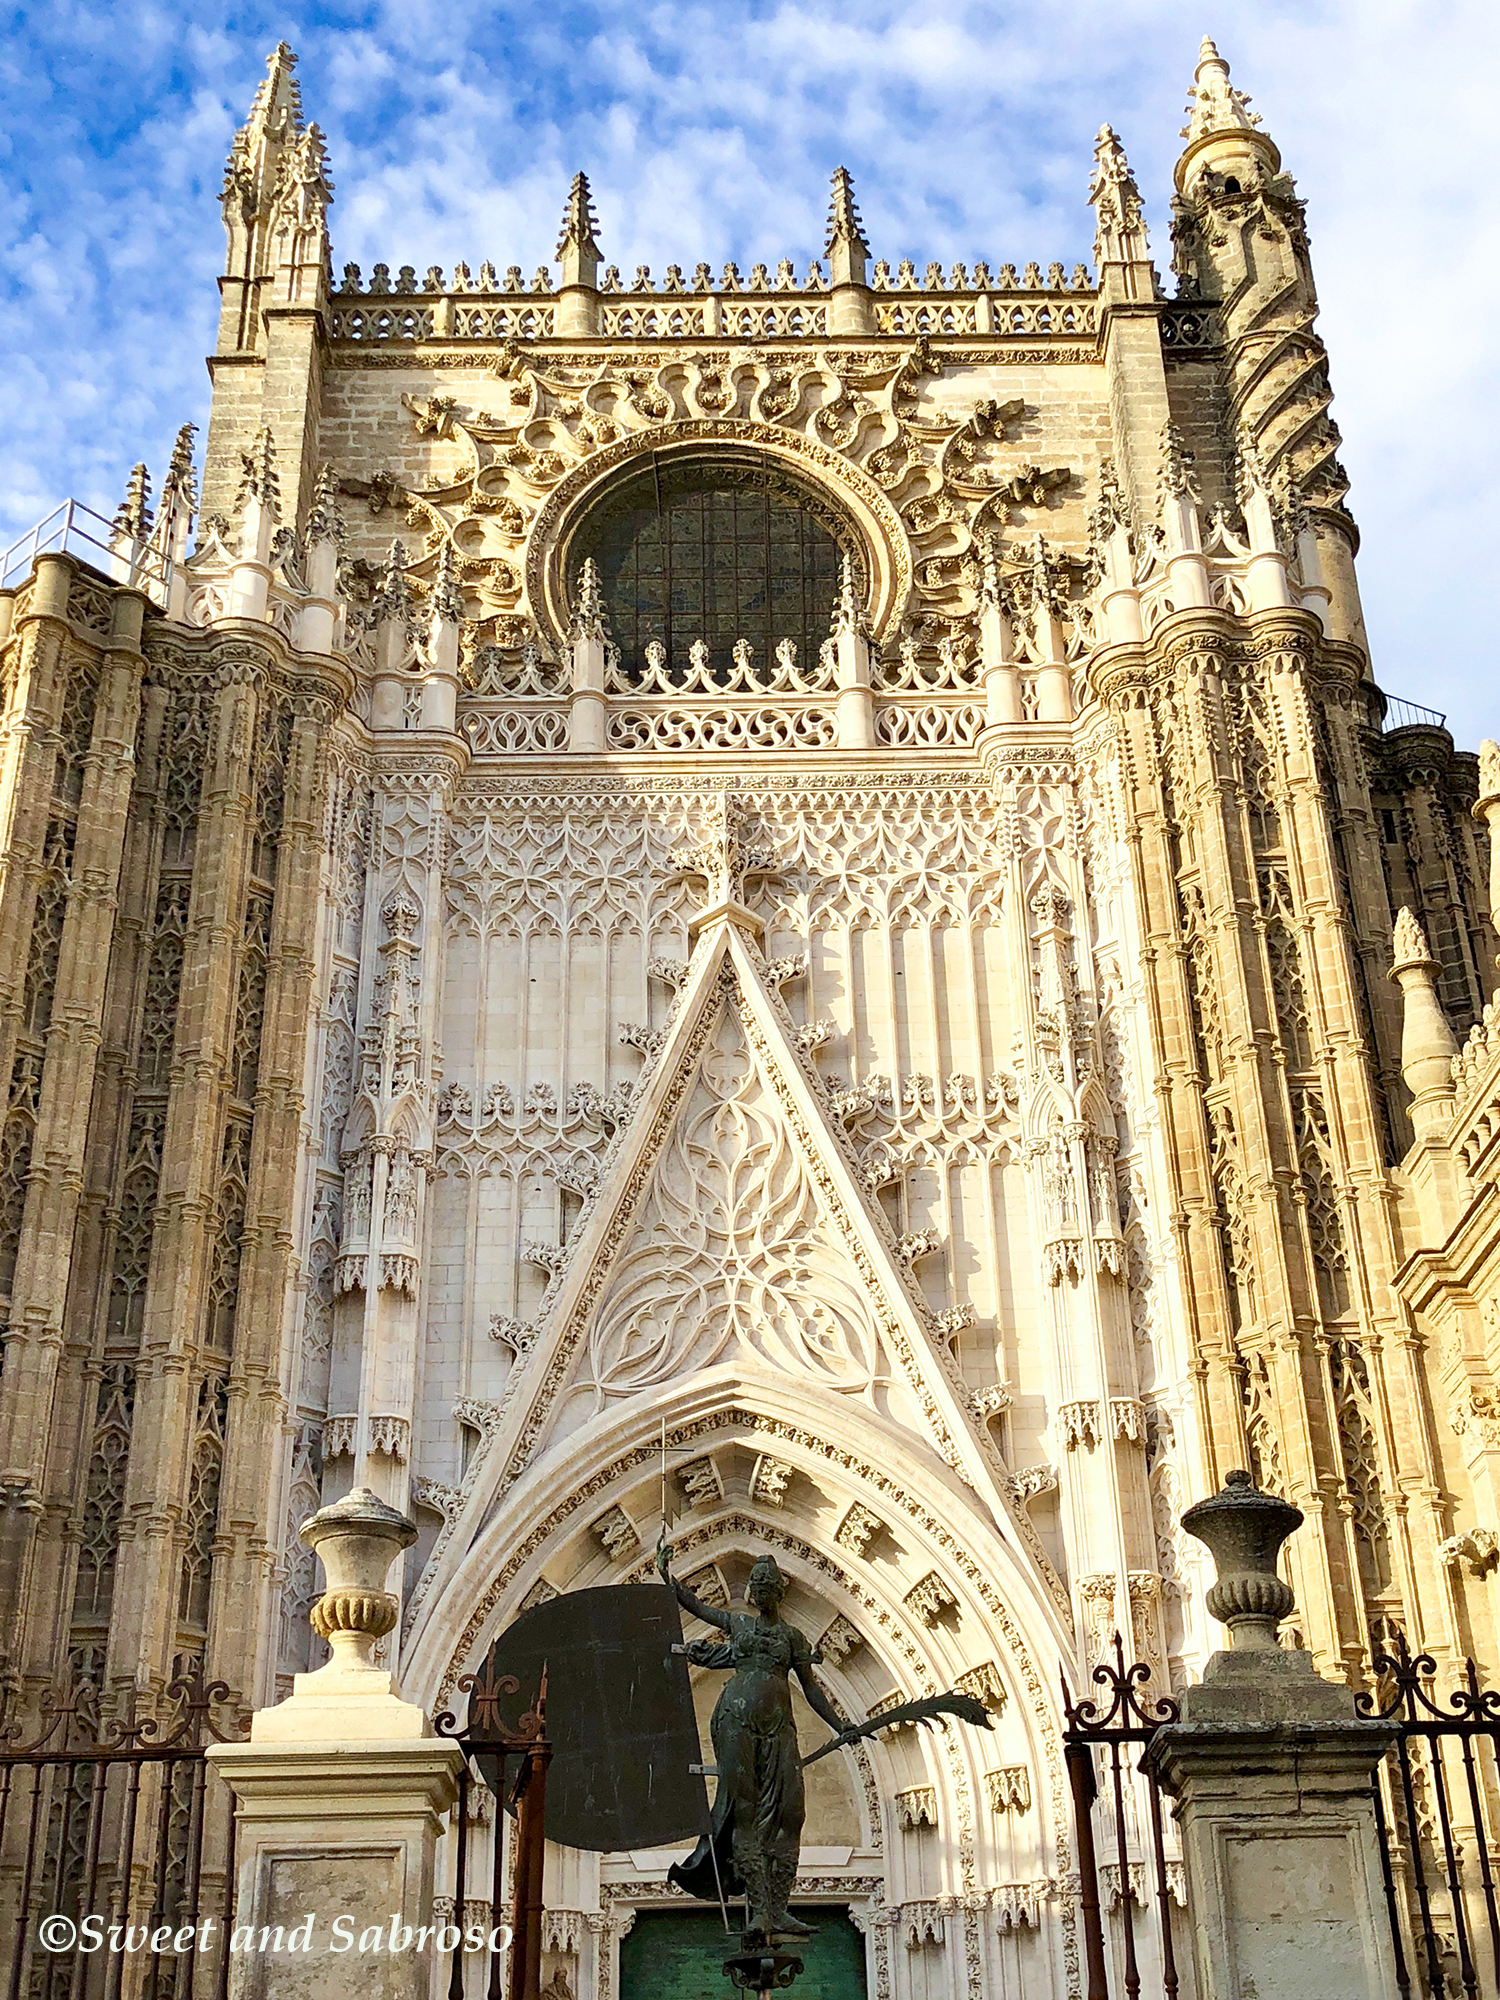 Front view and entrance of the Cathedral of Seville